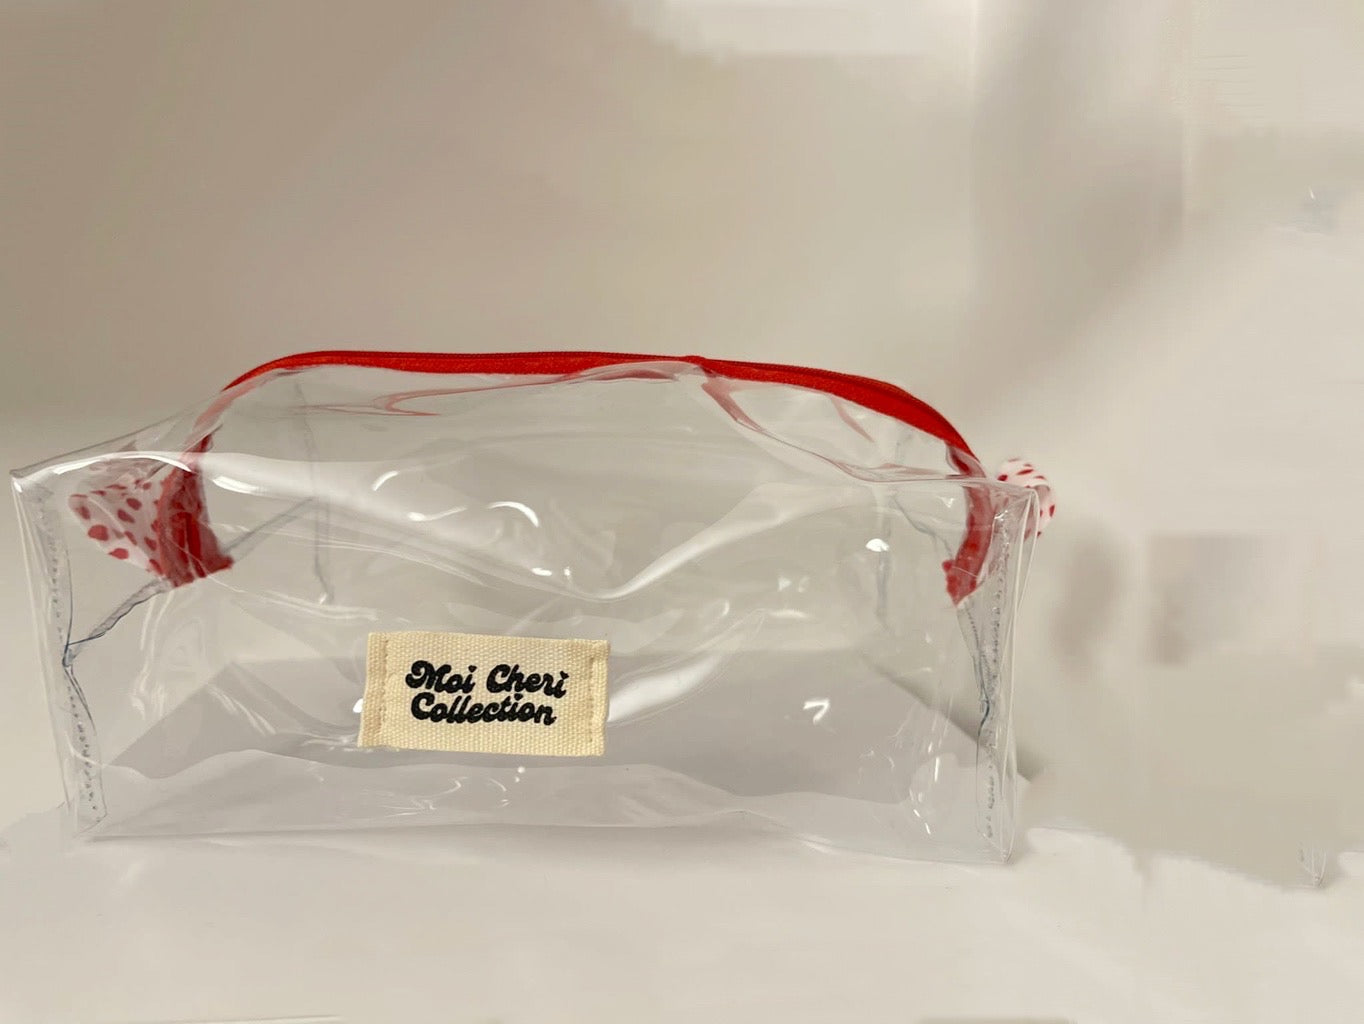 Clear Case Red - Moicheri collection store